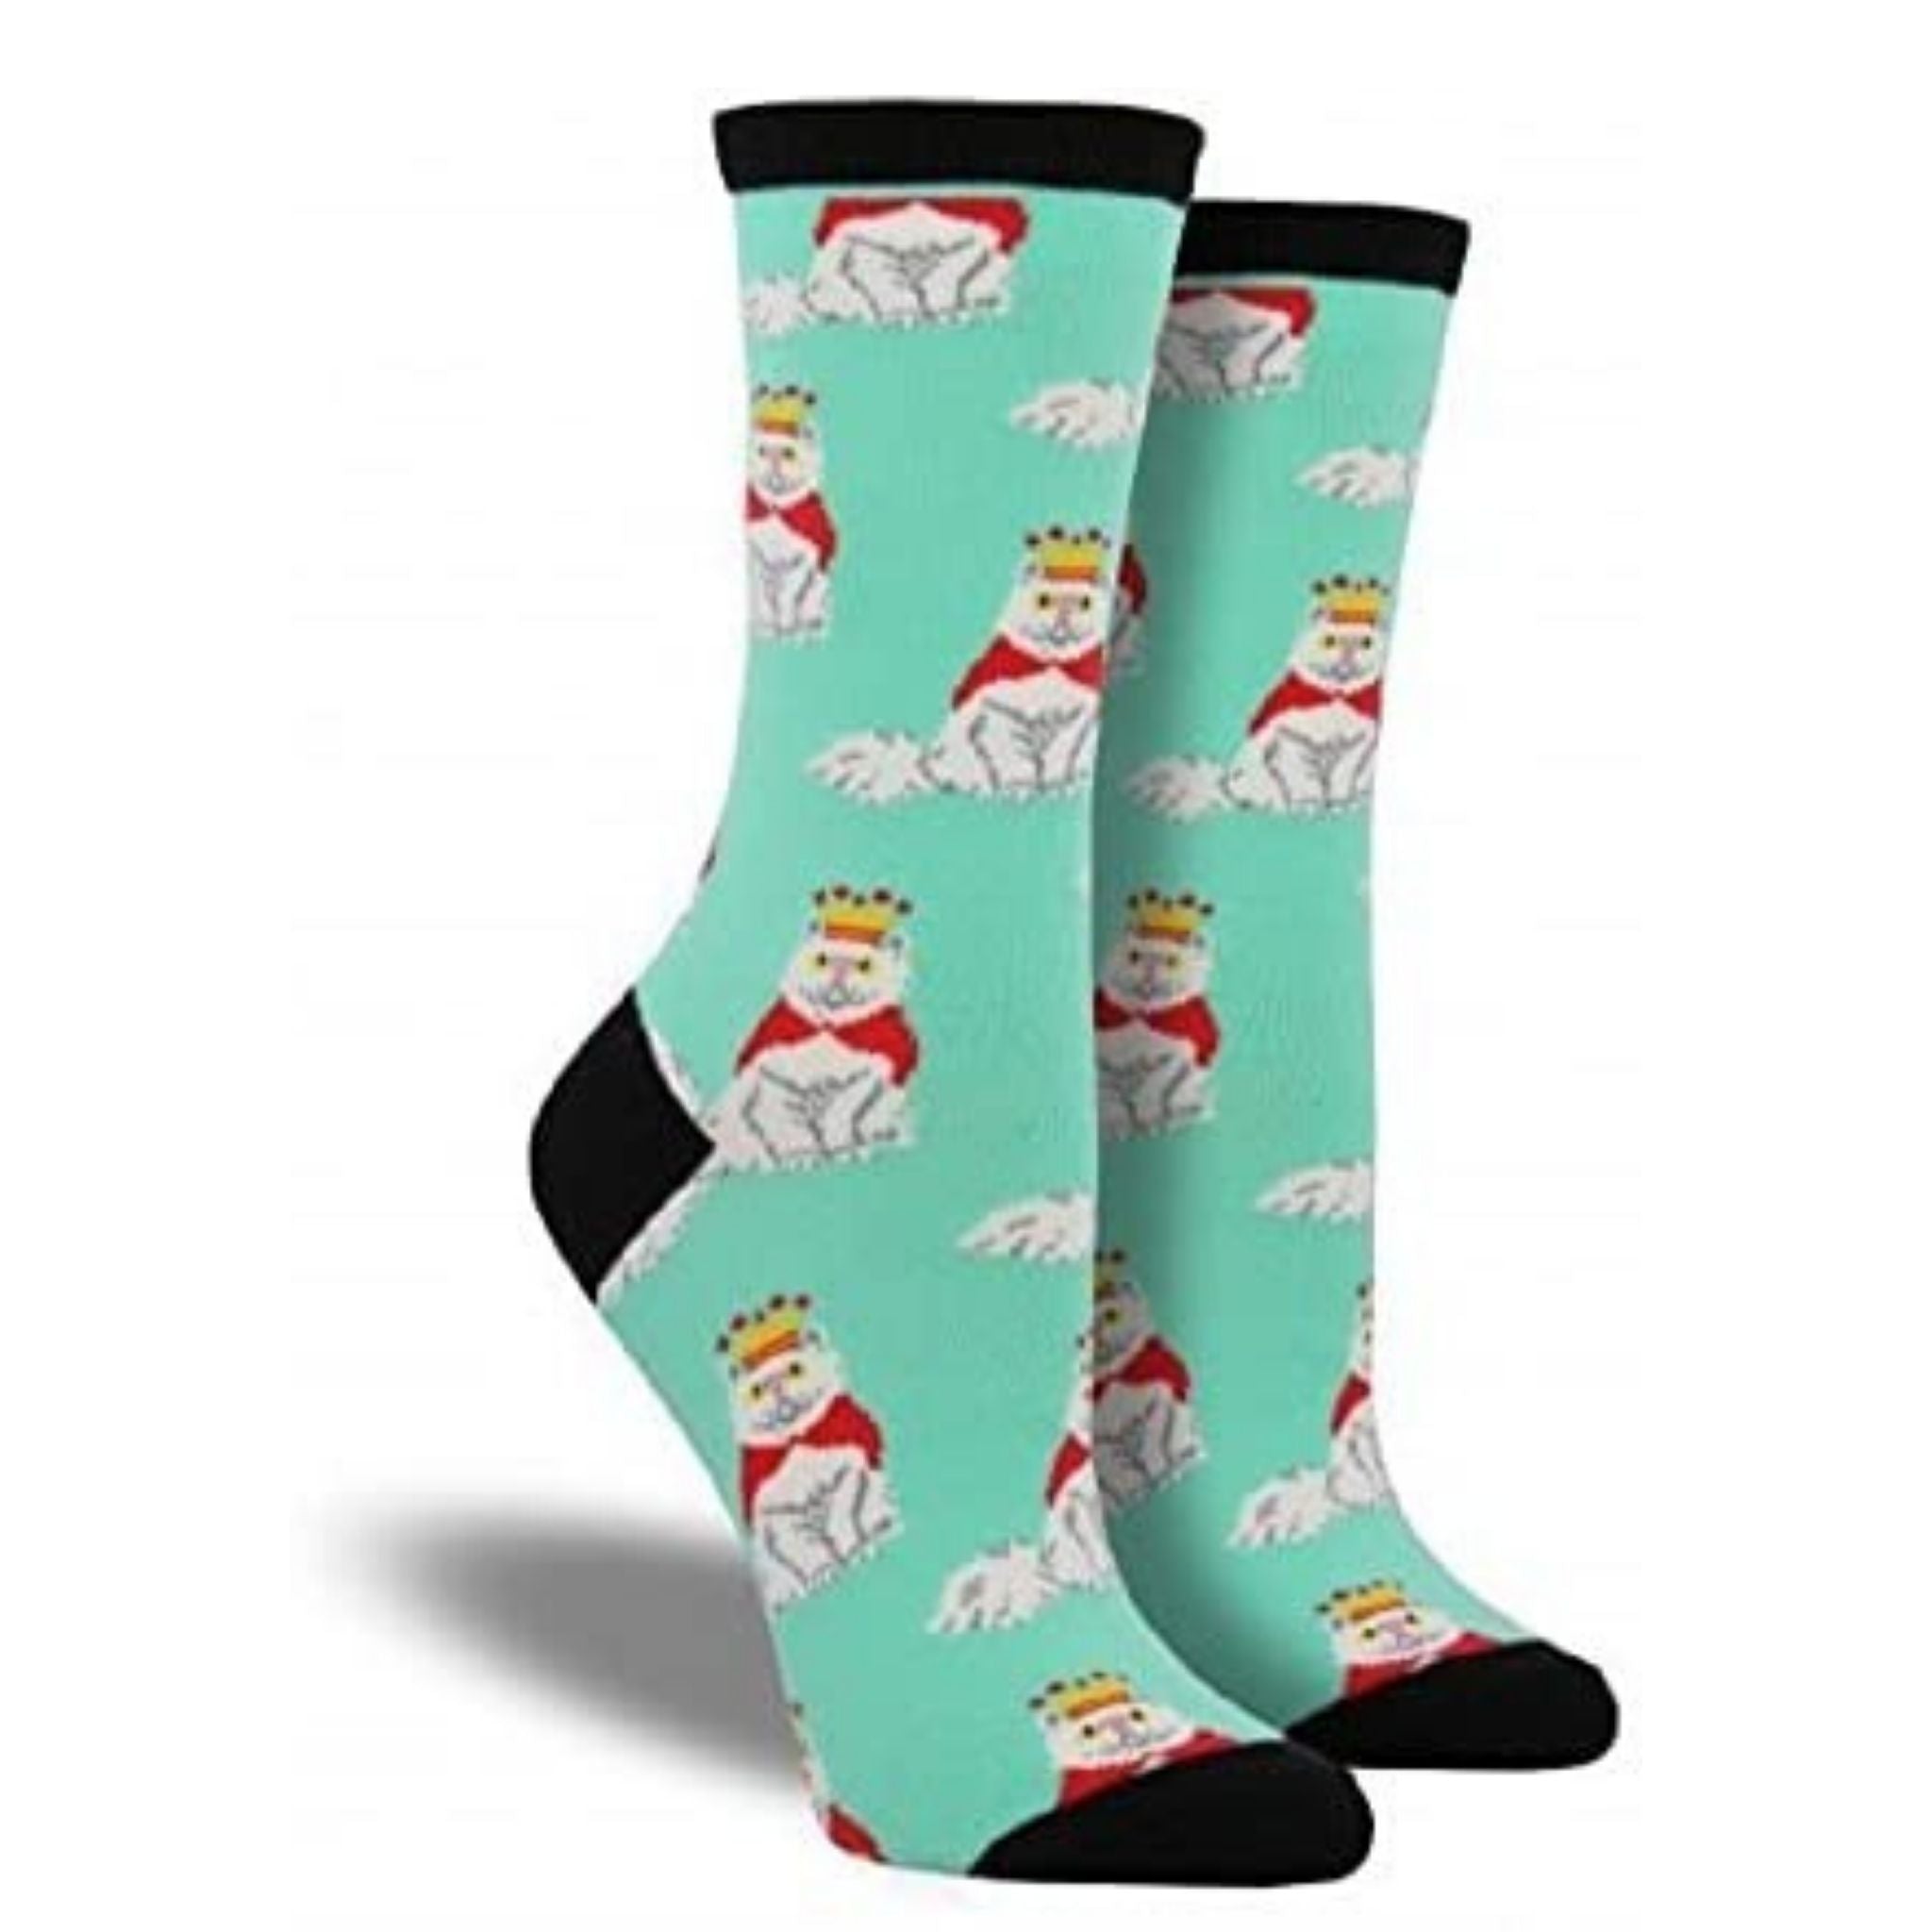 Teal socks with white cats wearing crown and cape